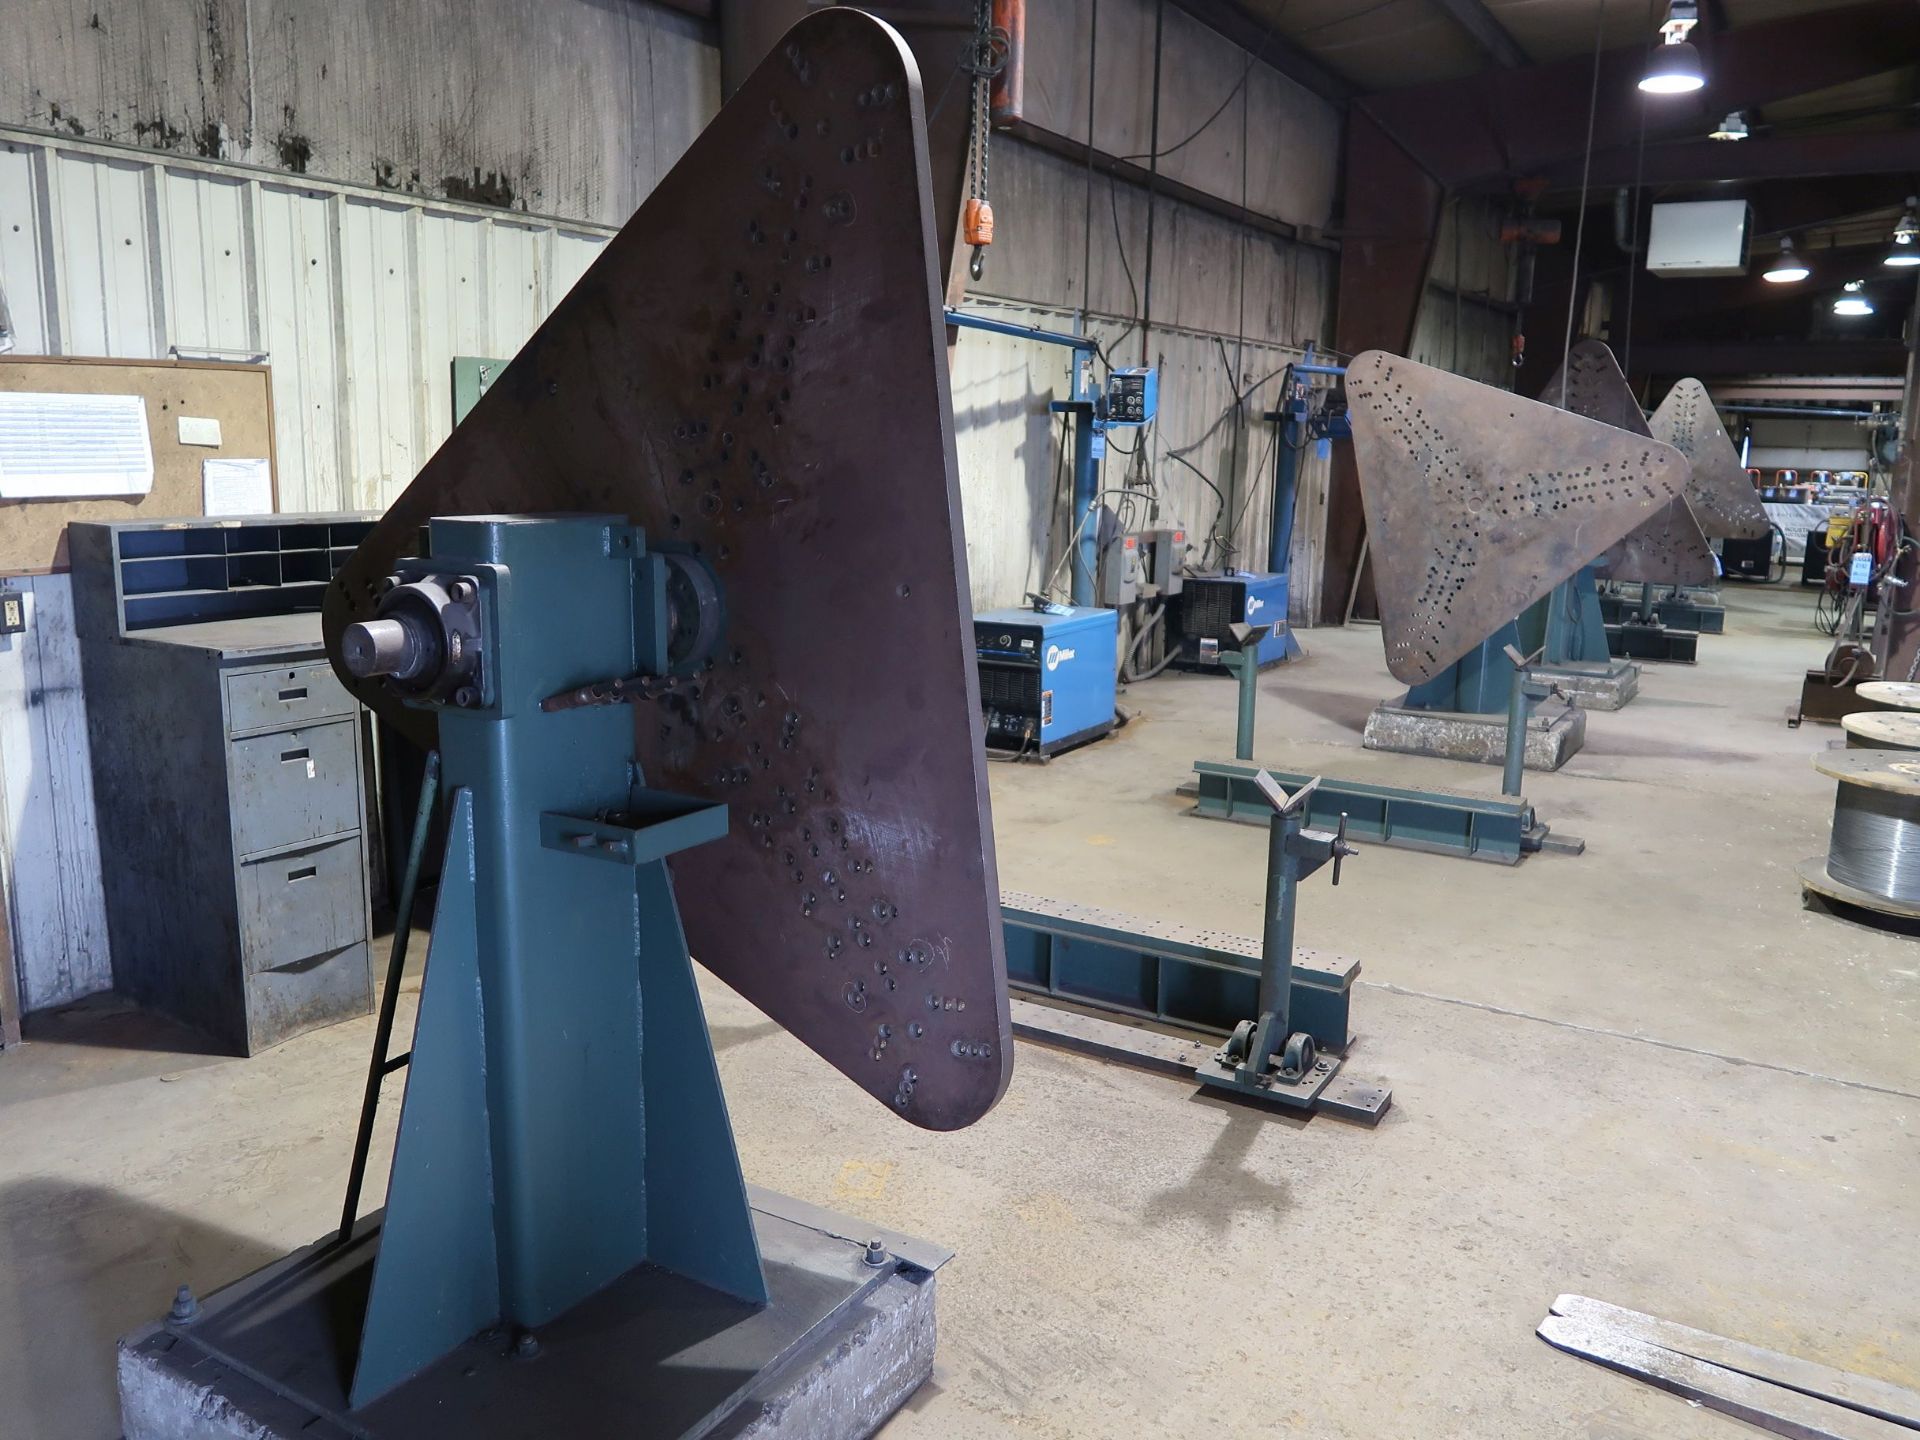 2,500 LB. CAPACITY APPROX. SPECIAL TAILSTOCK POWER WELDING POSITIONER SYSTEM WITH 20' BETWEEN